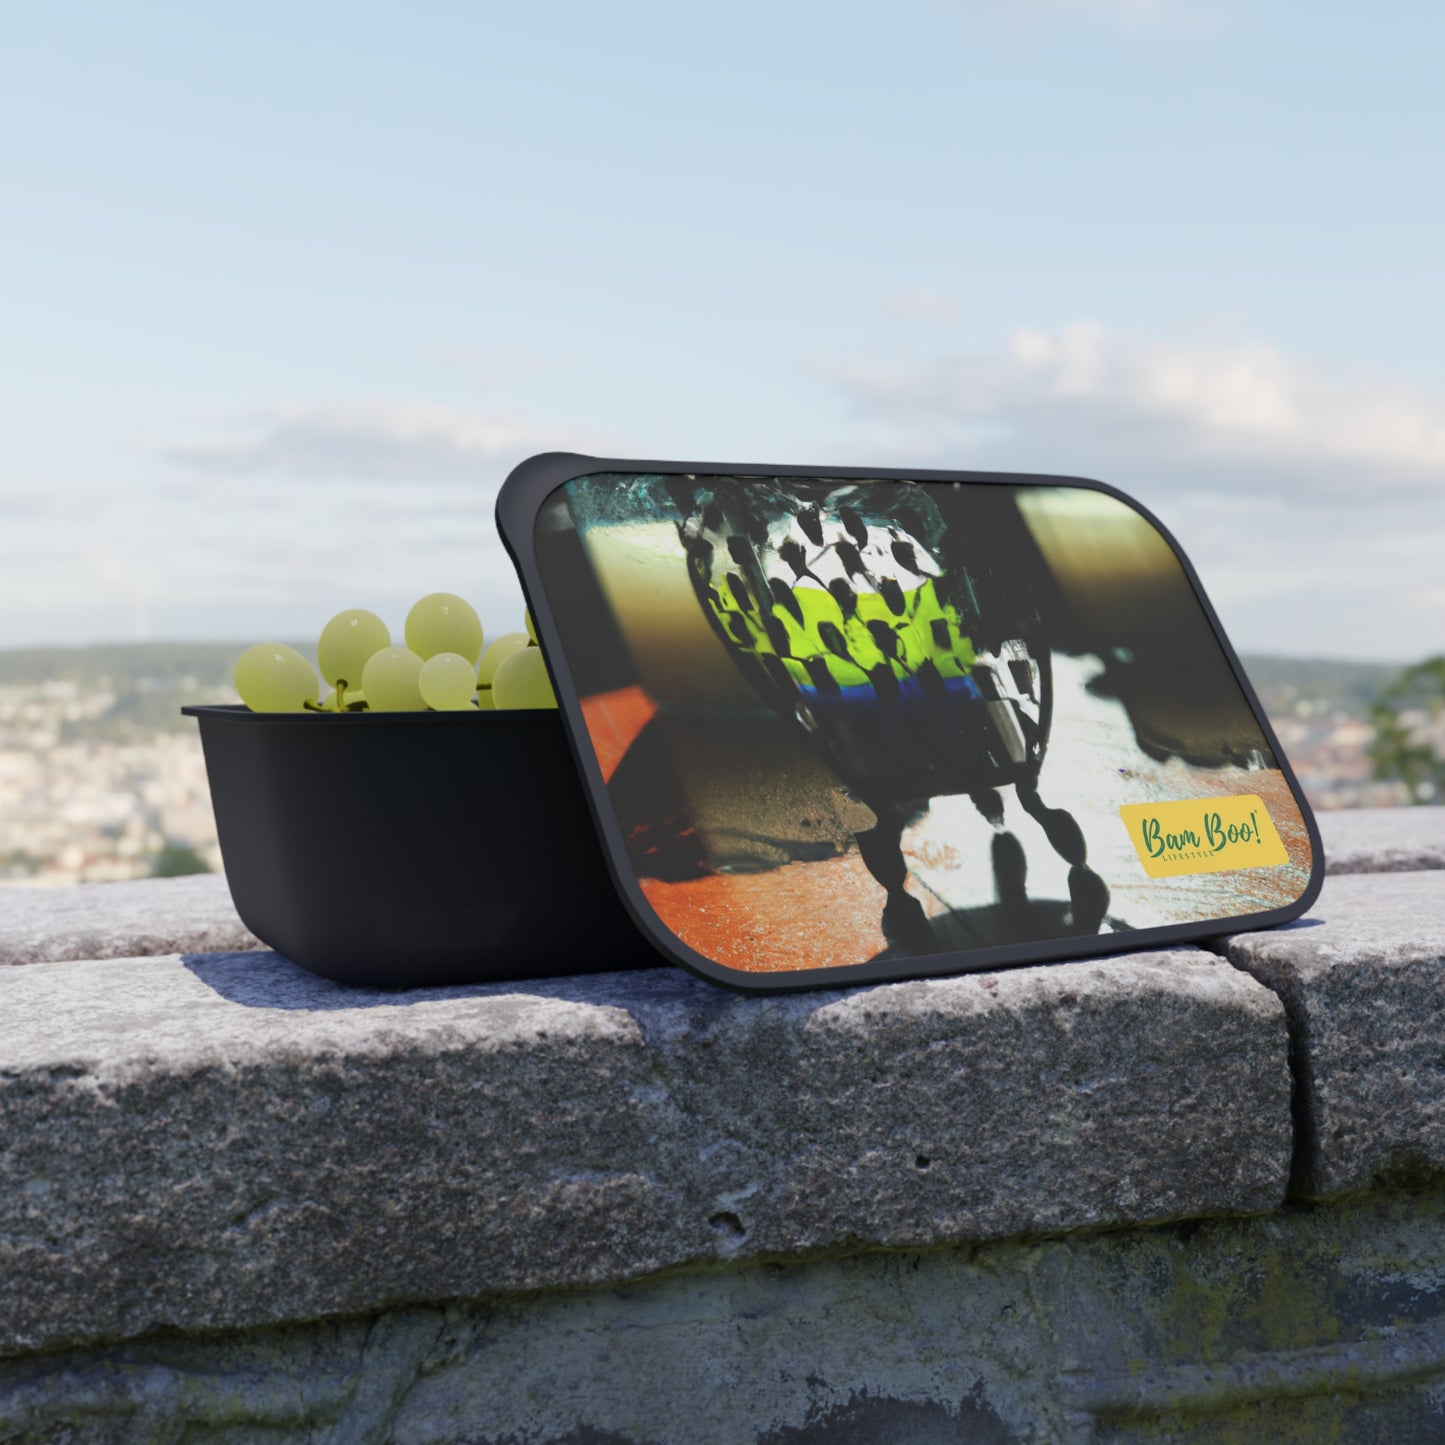 "A Vibrant Burst of Color: An Artistic Exploration of Life's Splendor" - Bam Boo! Lifestyle Eco-friendly PLA Bento Box with Band and Utensils